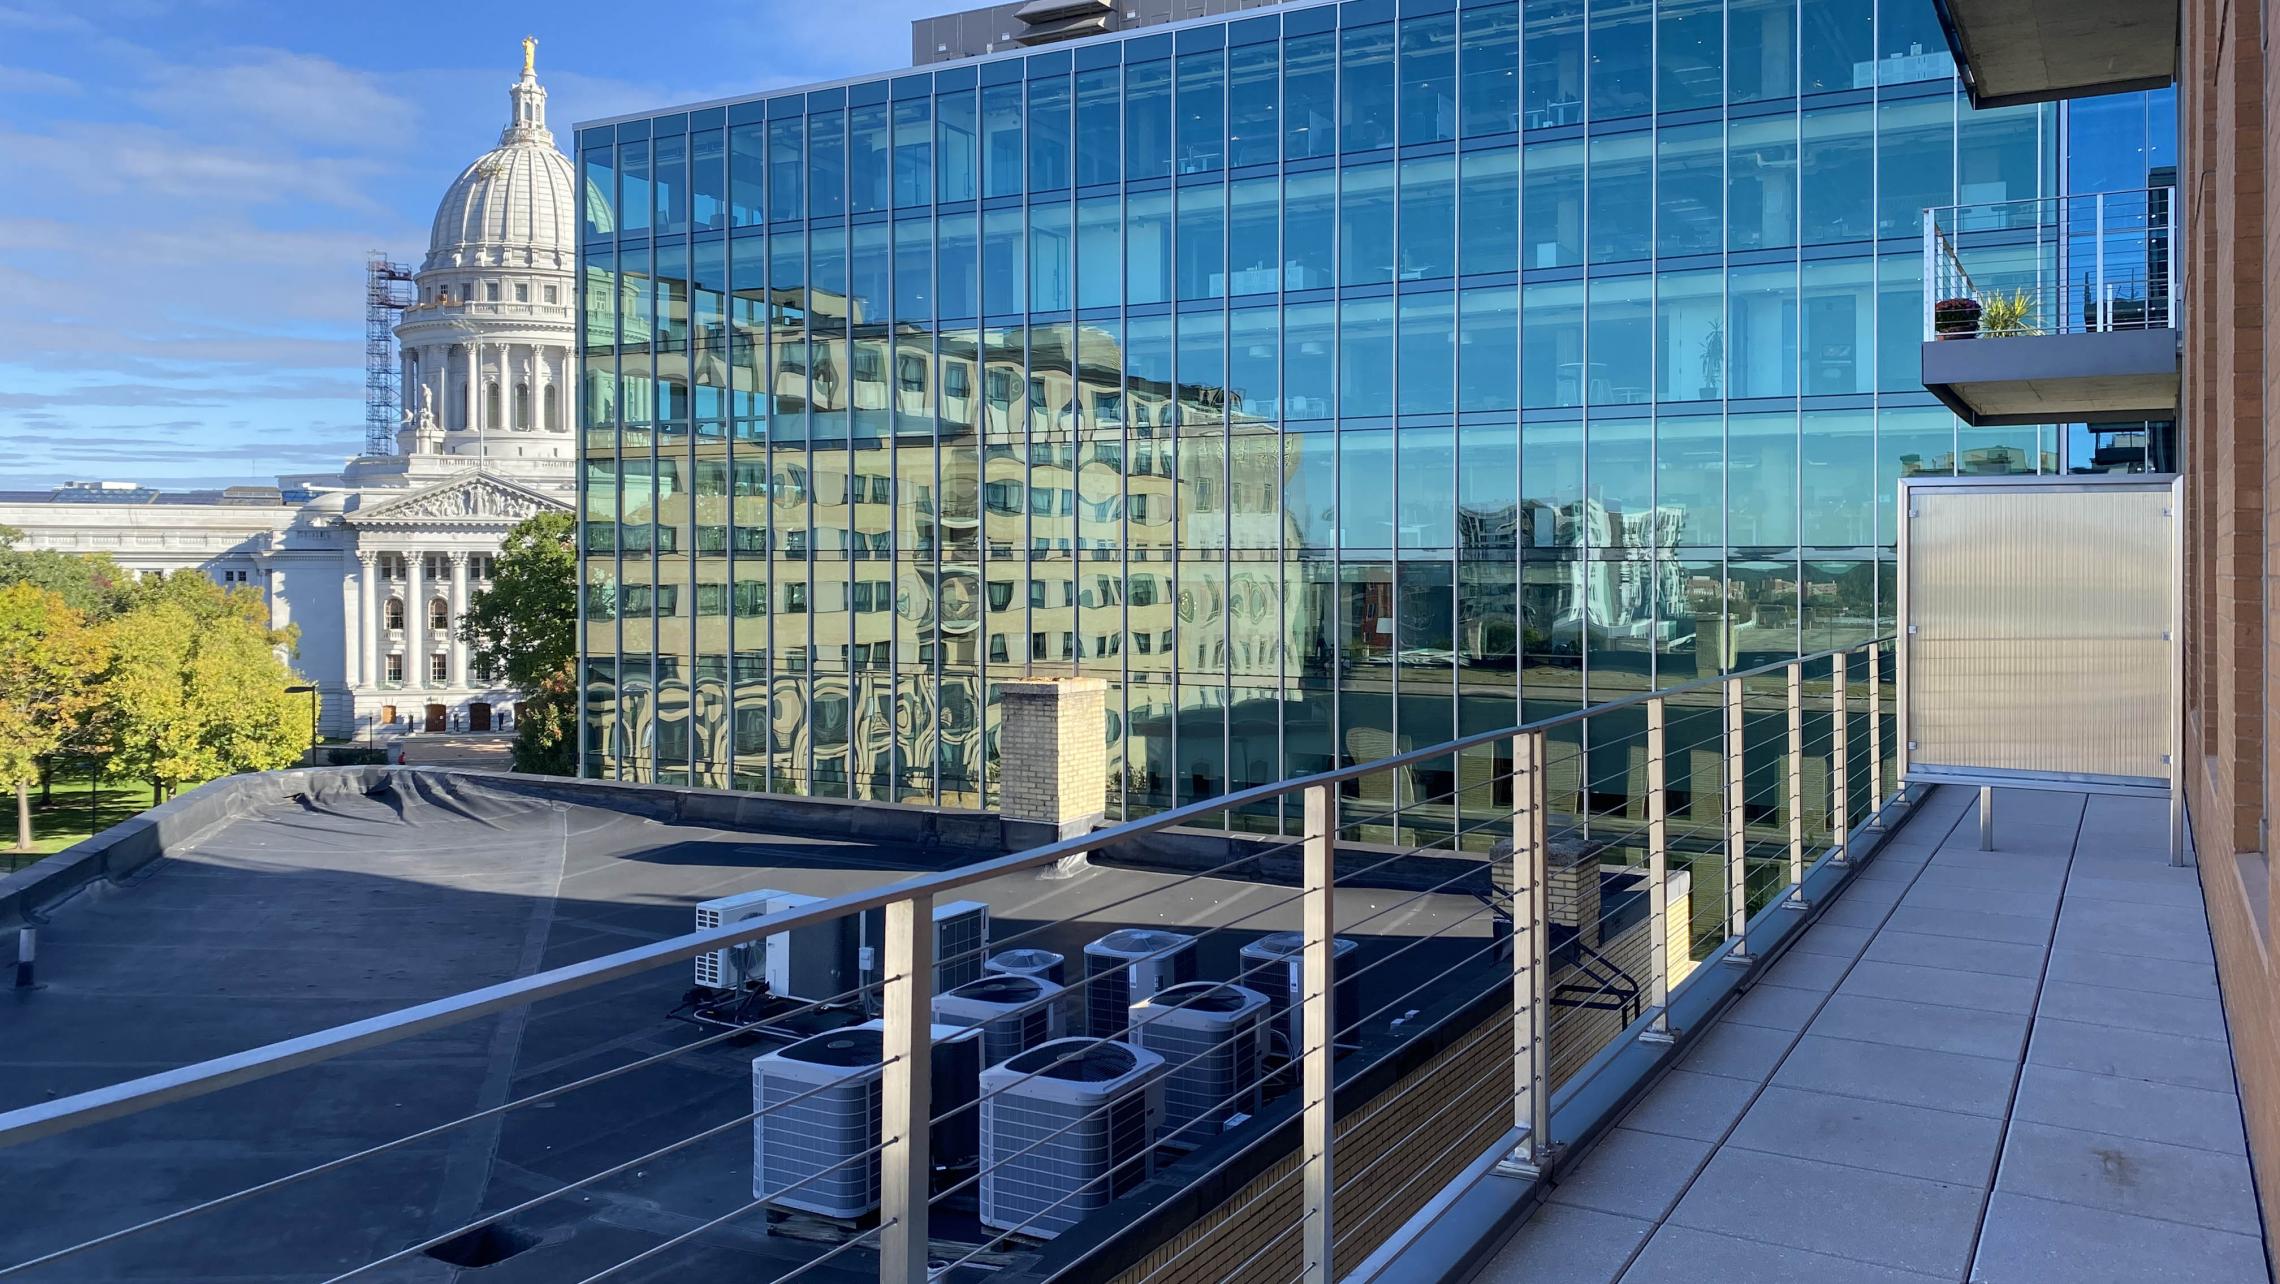 The-Pressman-Apartment-602-Two-Bedroom-Two-Bath-Kitchen-Living-Upscale-Luxurious-Modern-Exposed-Duct-Concrete-Capitol-Square-Downtown-Views-Madison-Balcony-Terrace-Pets-Fitness-Lounge-Grill-Lifestyle